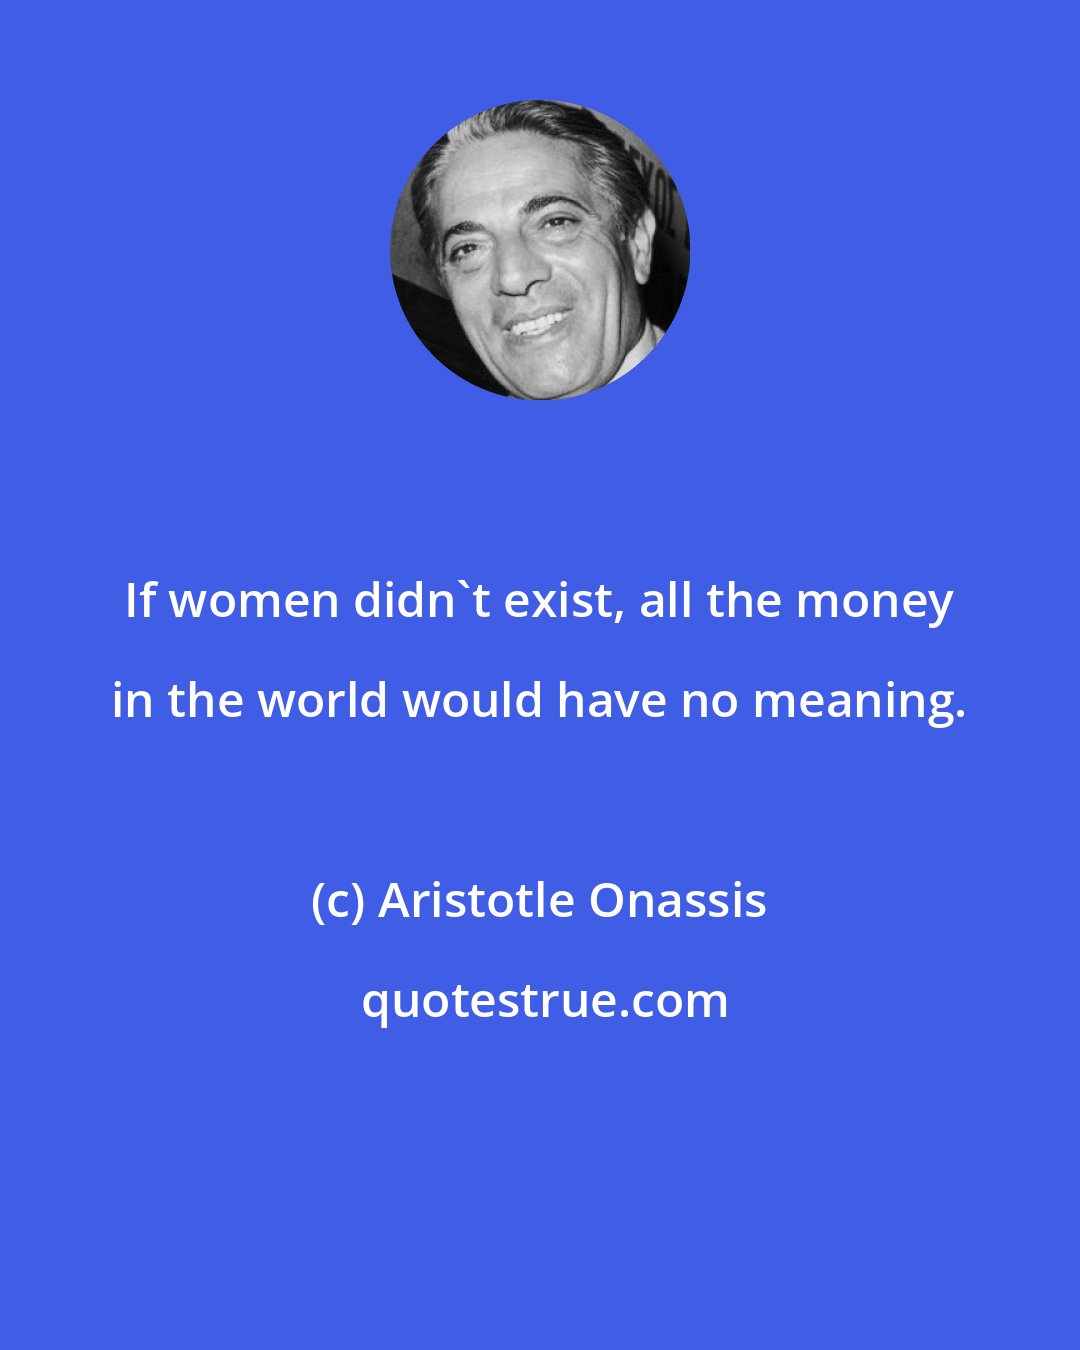 Aristotle Onassis: If women didn't exist, all the money in the world would have no meaning.